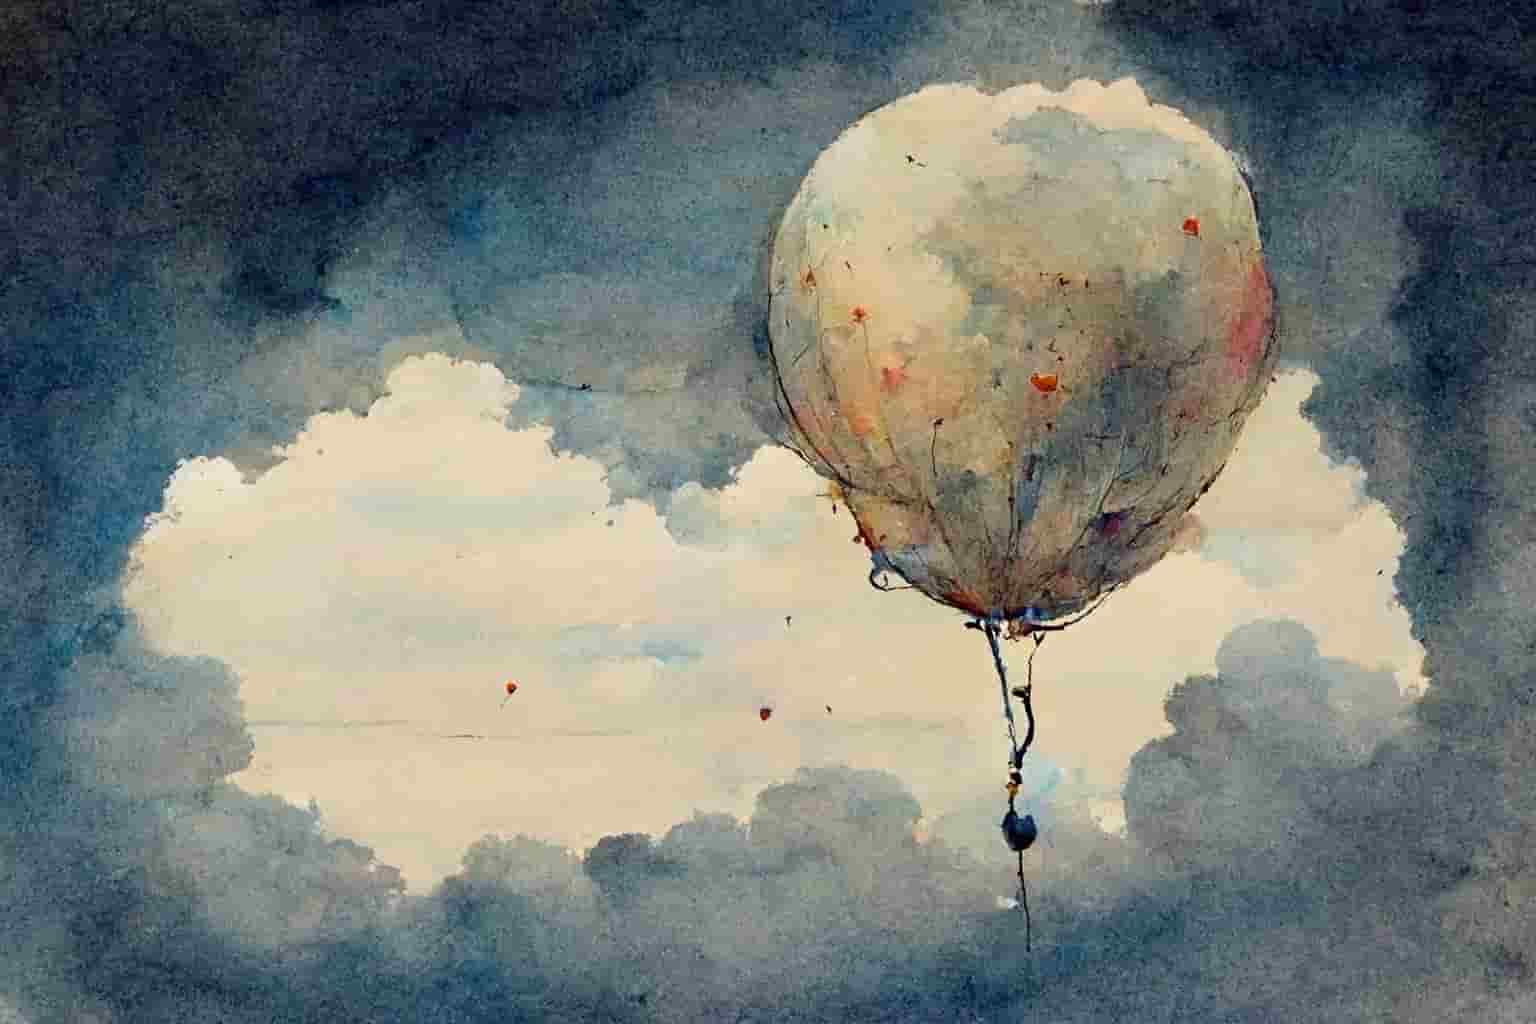 A watercolor painting of a sad balloon, floating in a cloudy sky